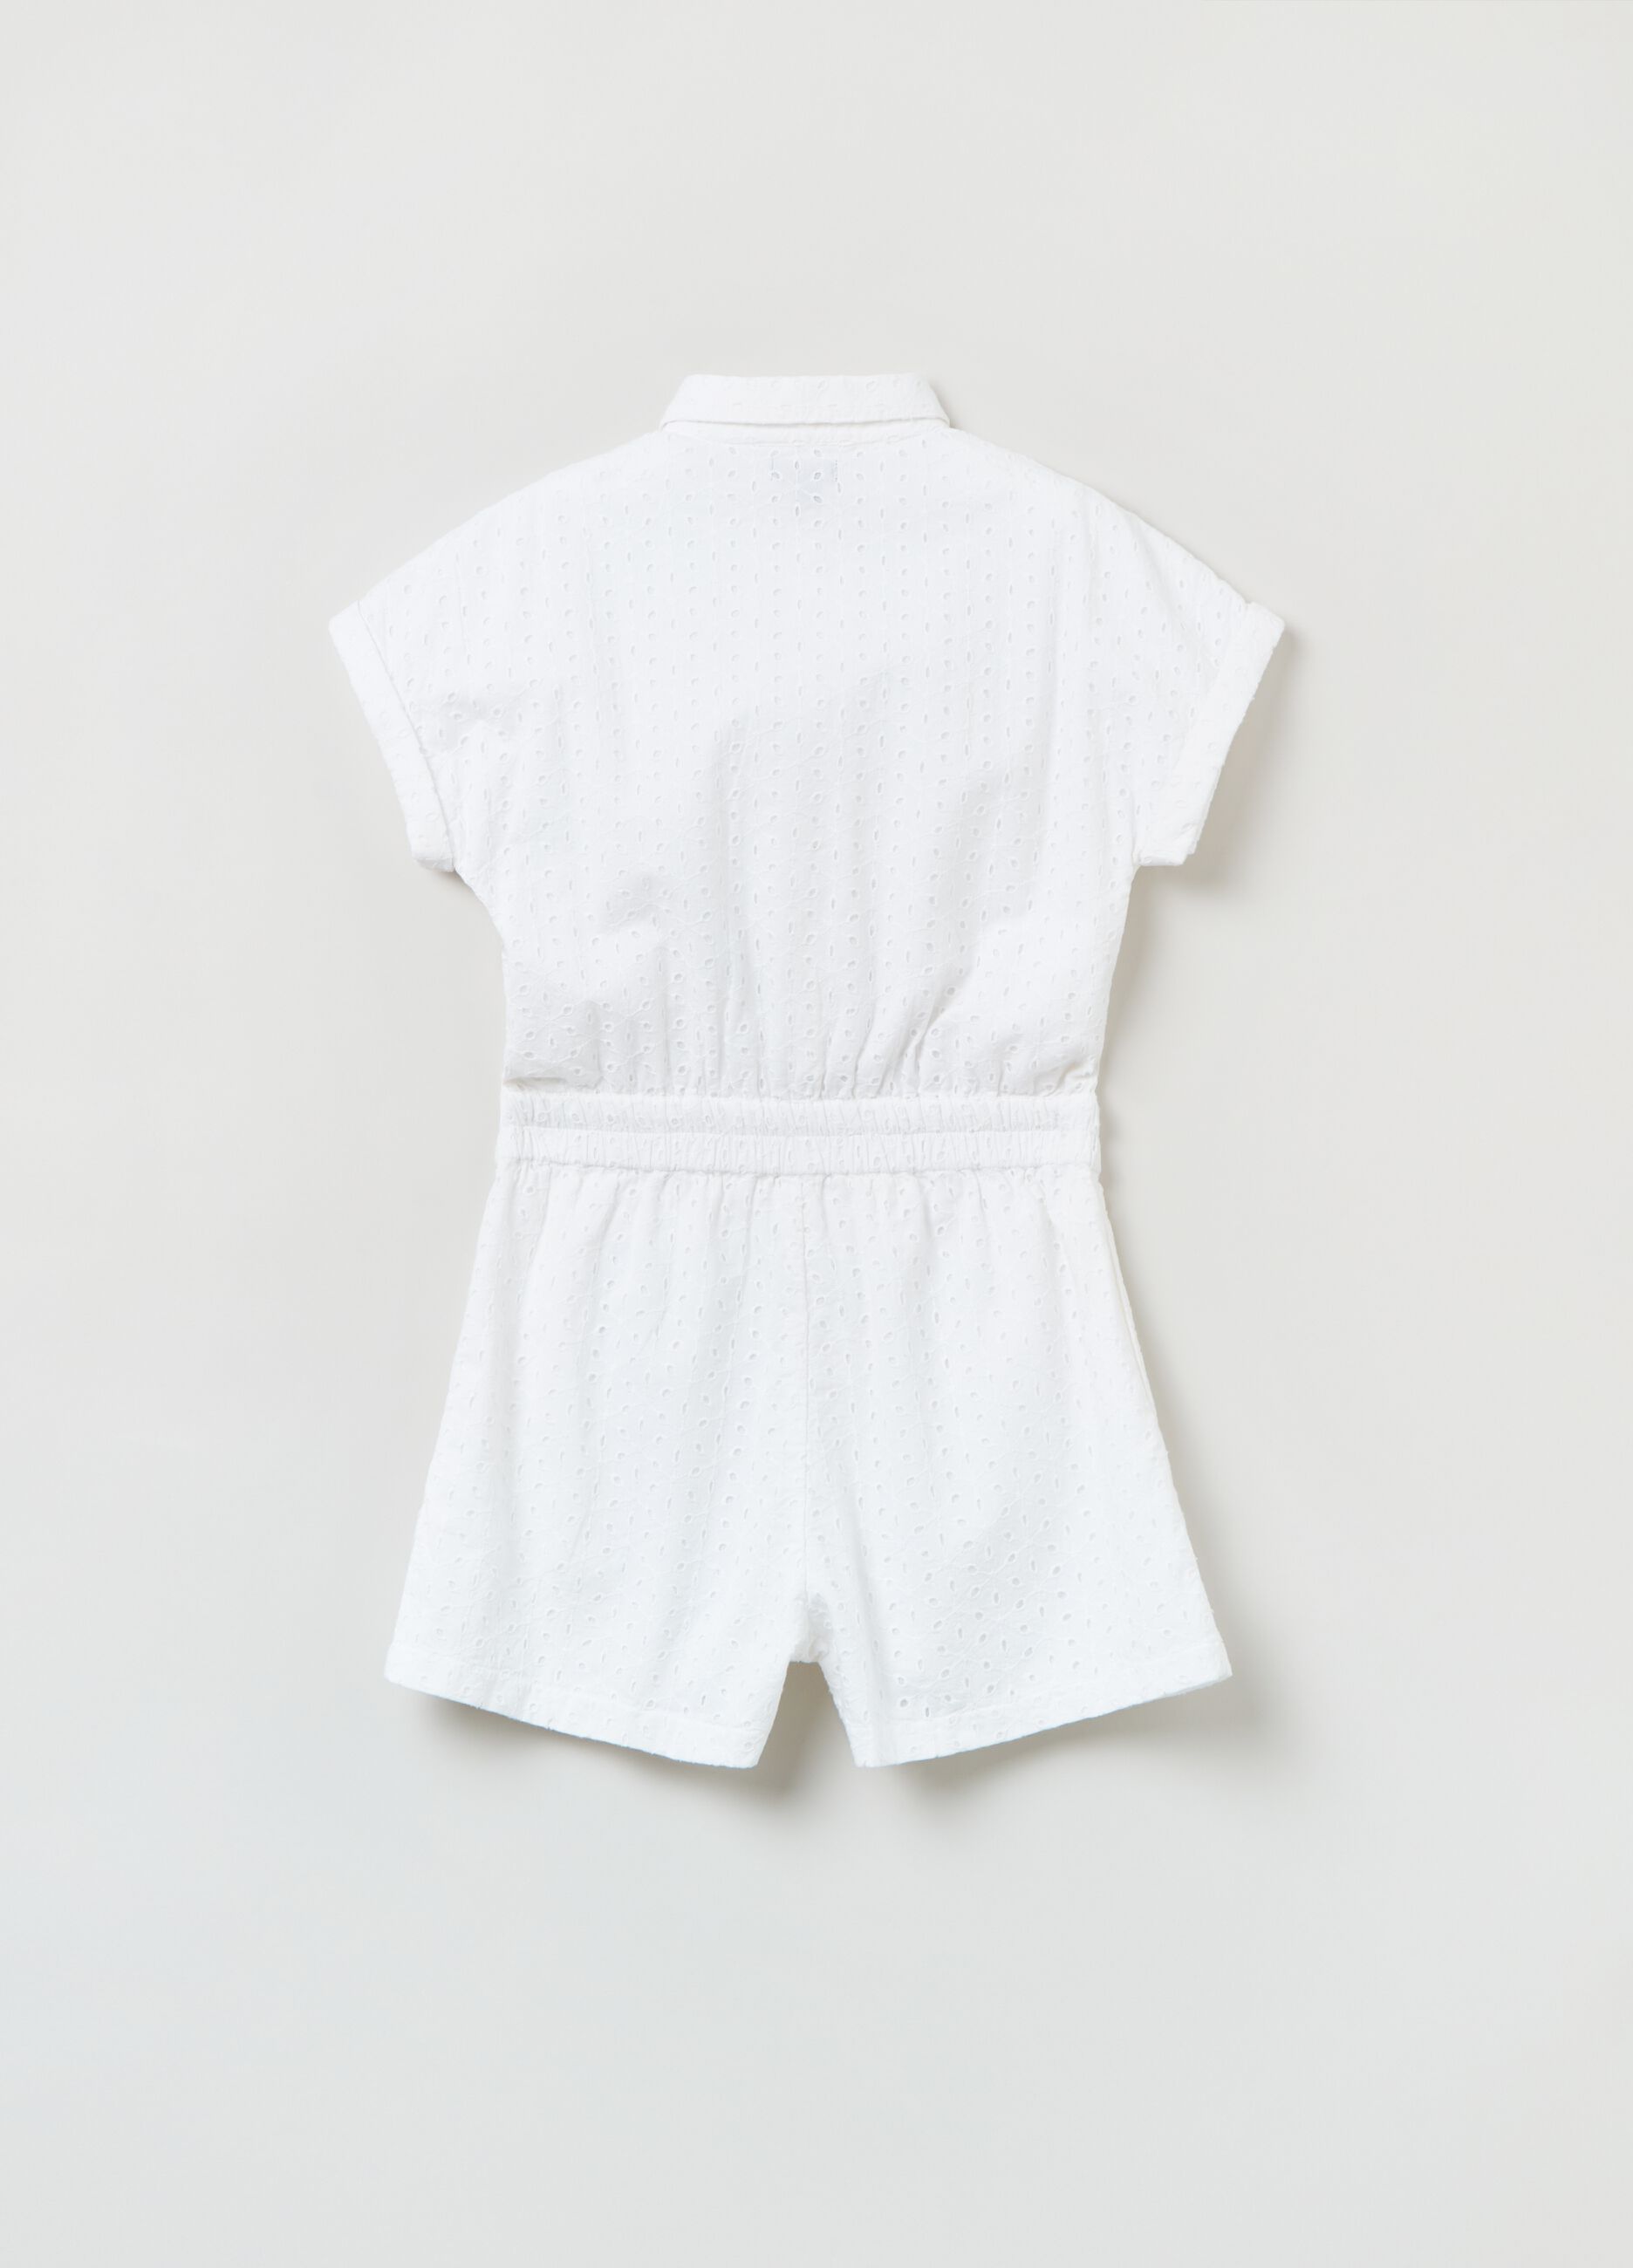 Short playsuit in broderie anglaise